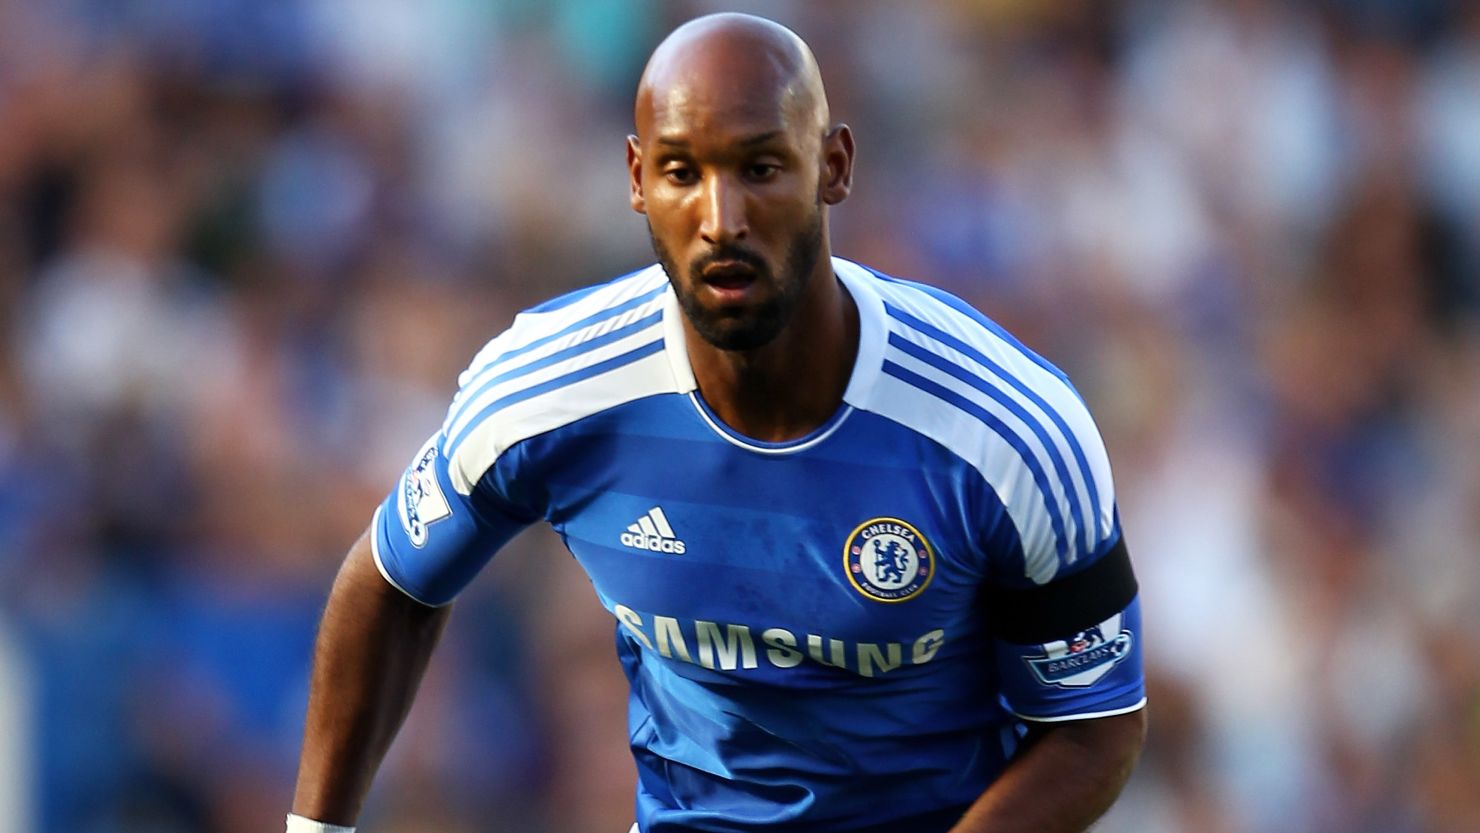 Nicolas Anelka is expected to leave English club Chelsea during the January transfer window.